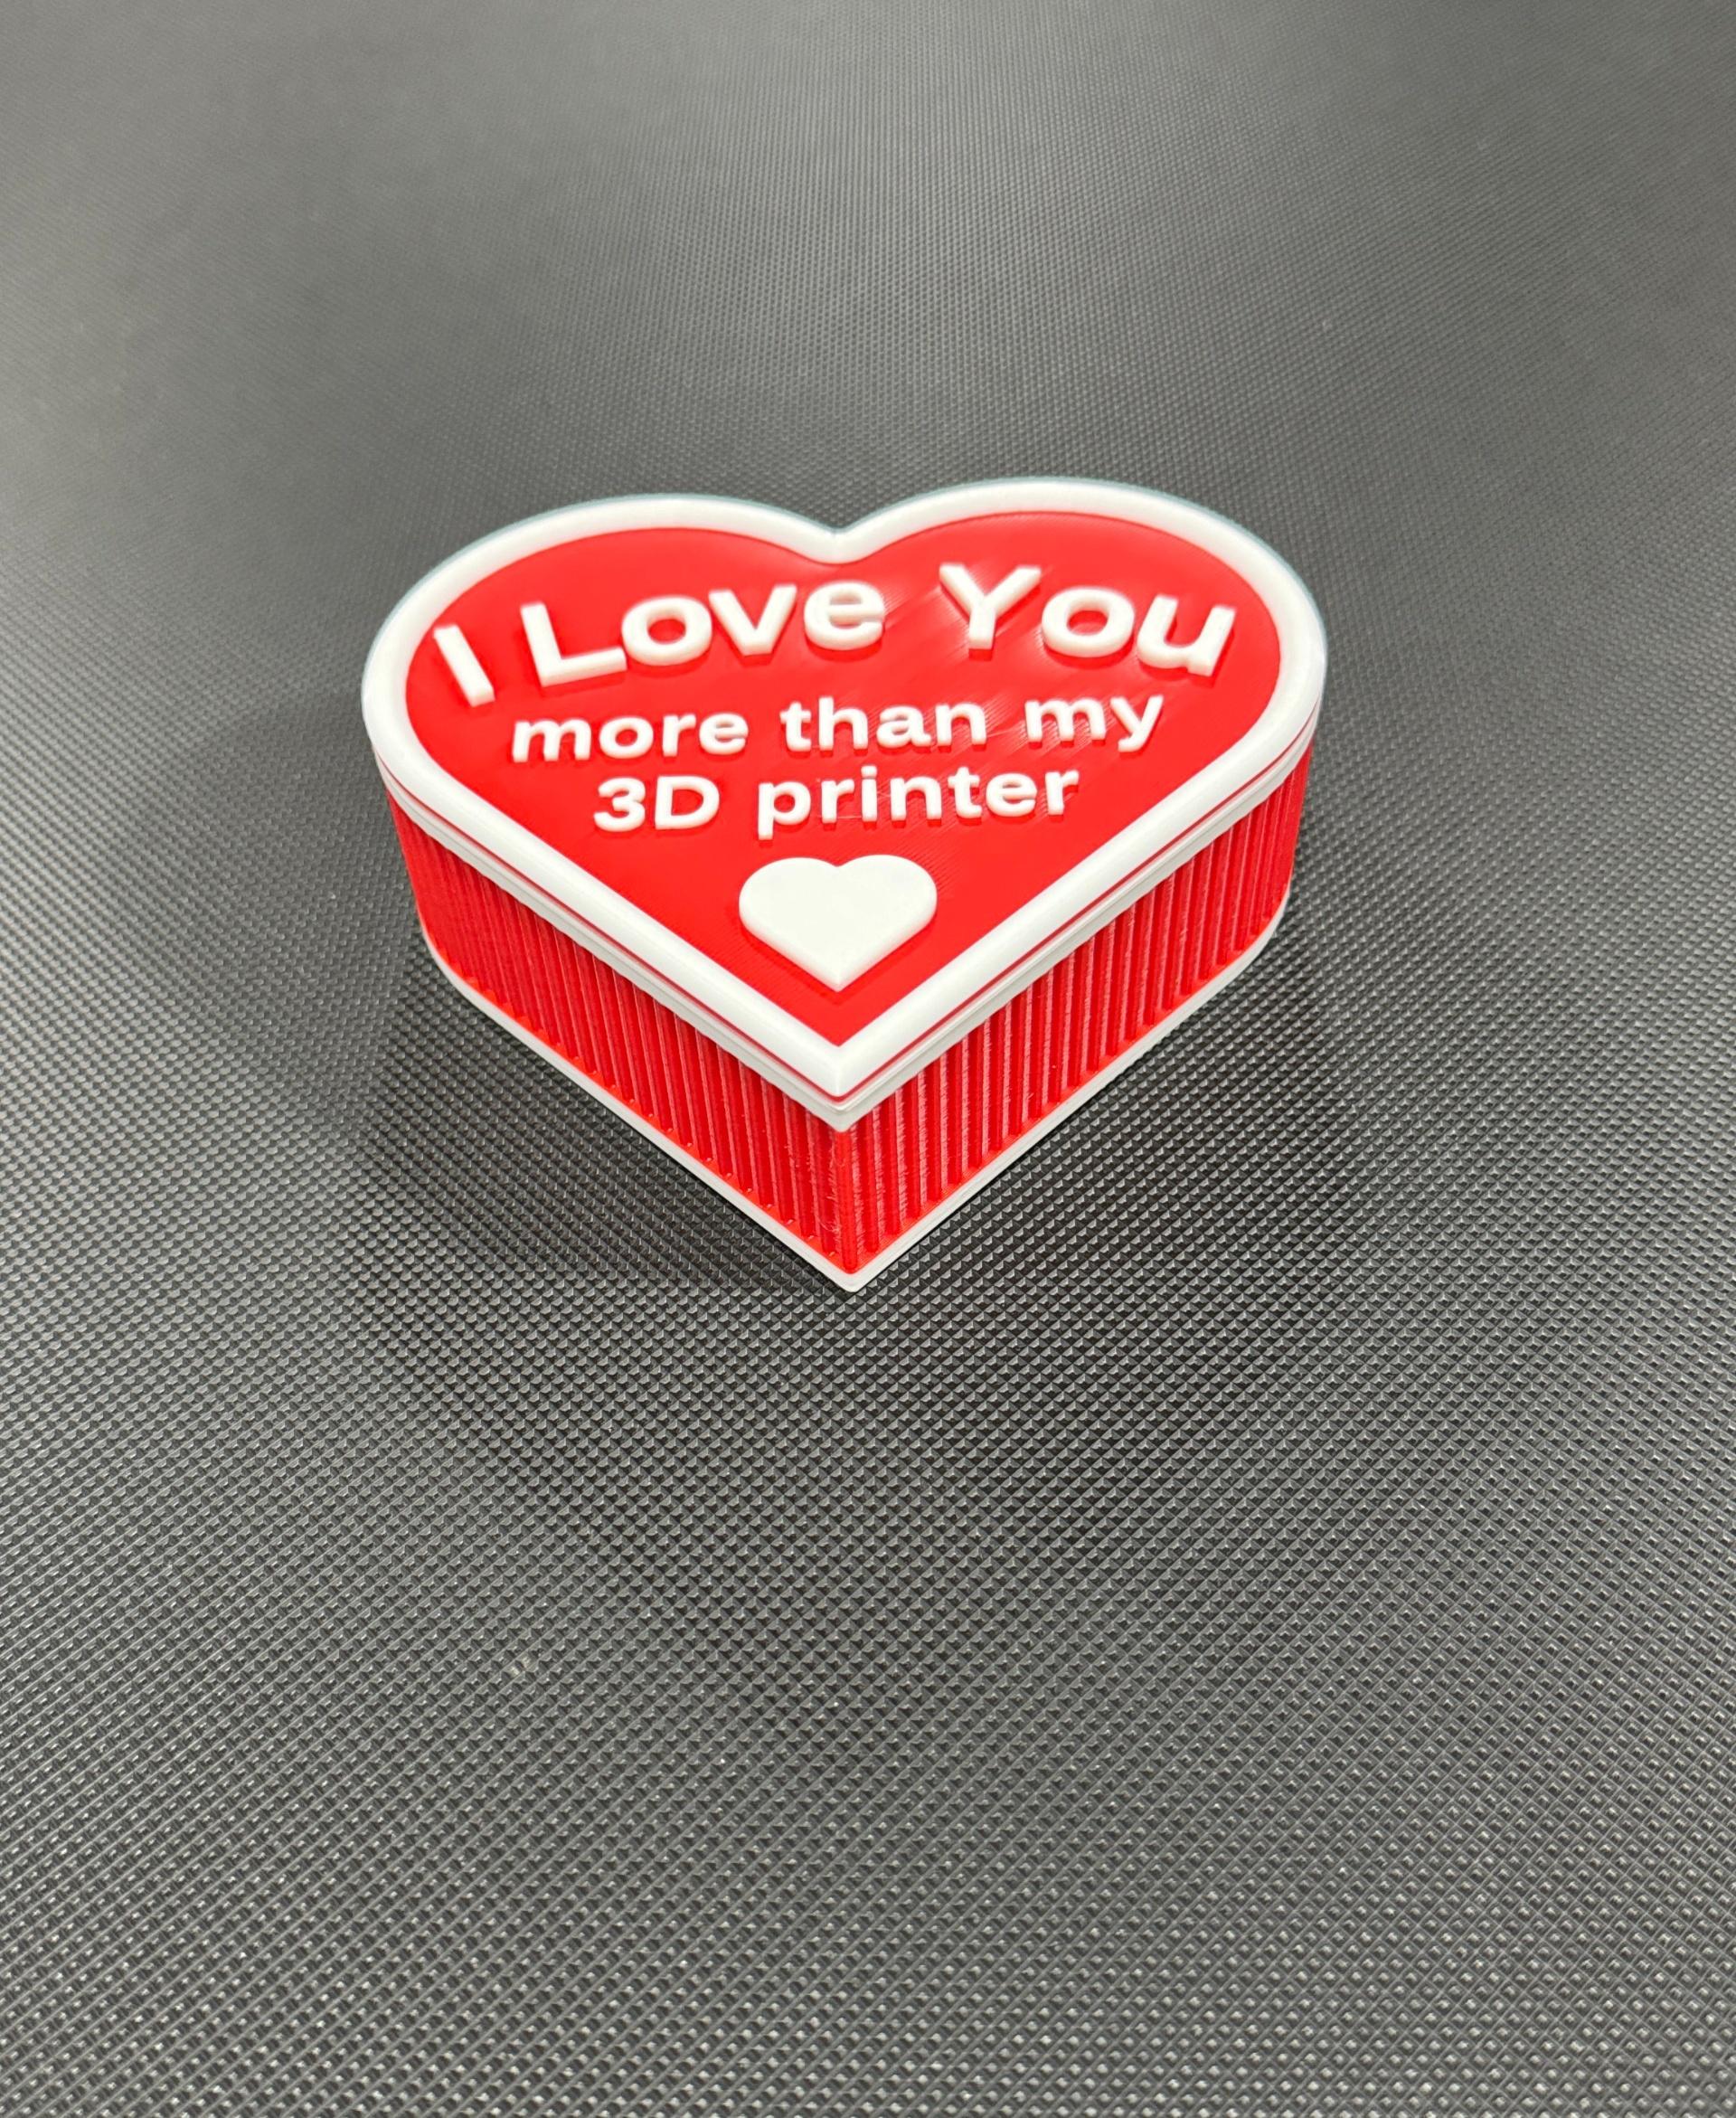 I Love You More Than My 3D Printer - I did the filament change at layer 36 on the lid. I changed twice on the box. Once at 24 and then again at 169.
Very nice work DaveMakesStuff! Thank you for sharing. - 3d model